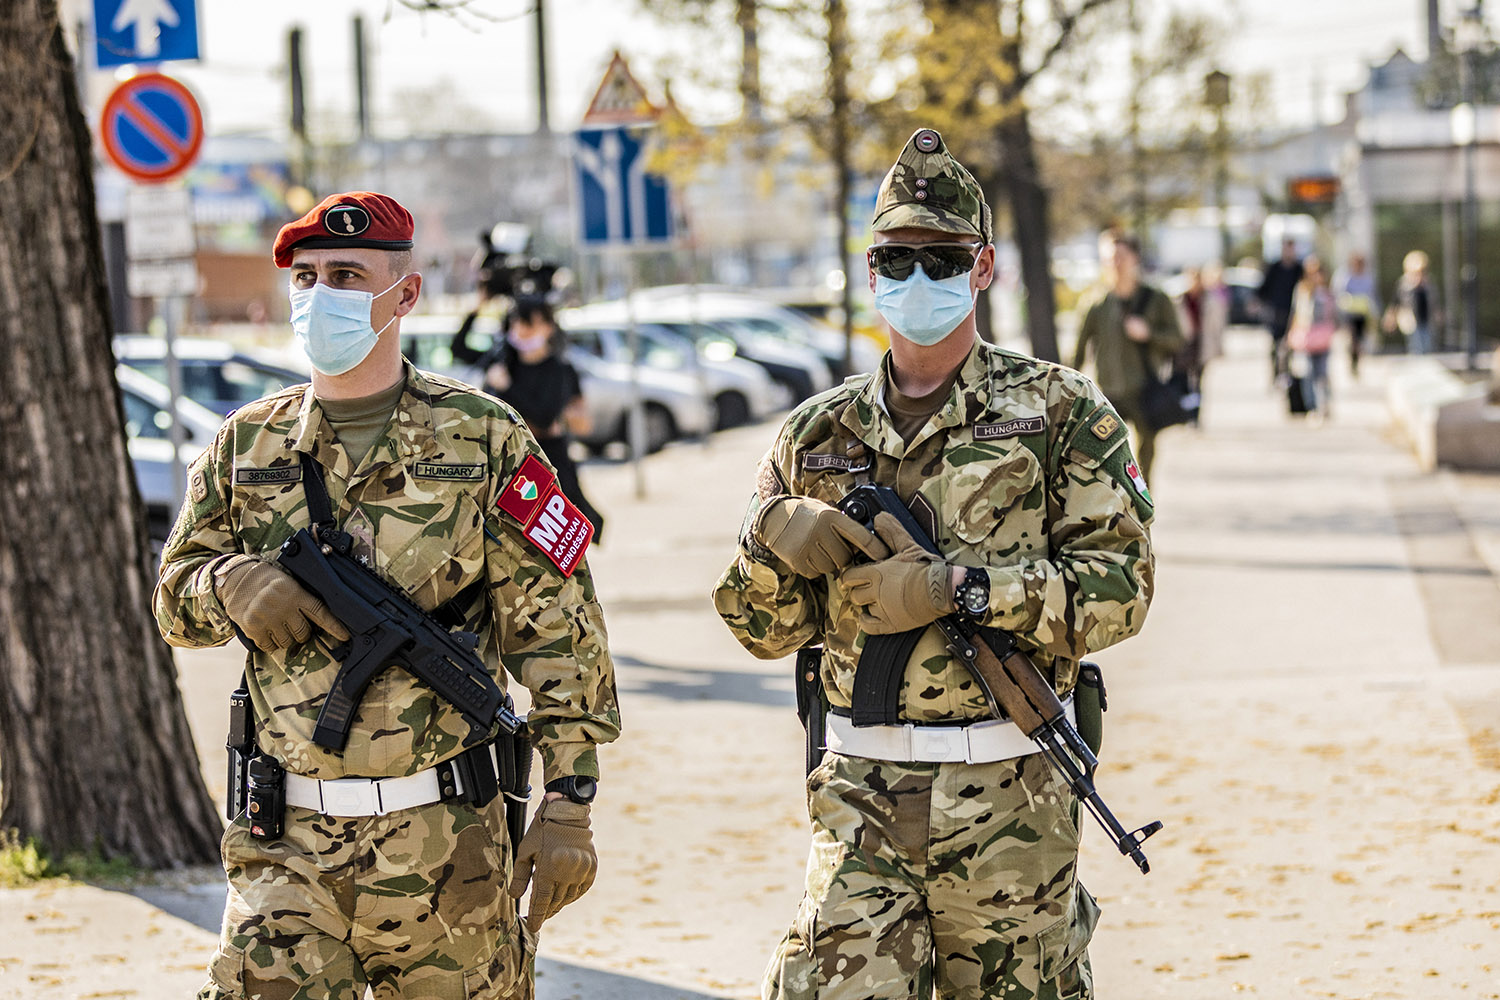 covid-19_hungarian_soldiers_armed_city_streets_1